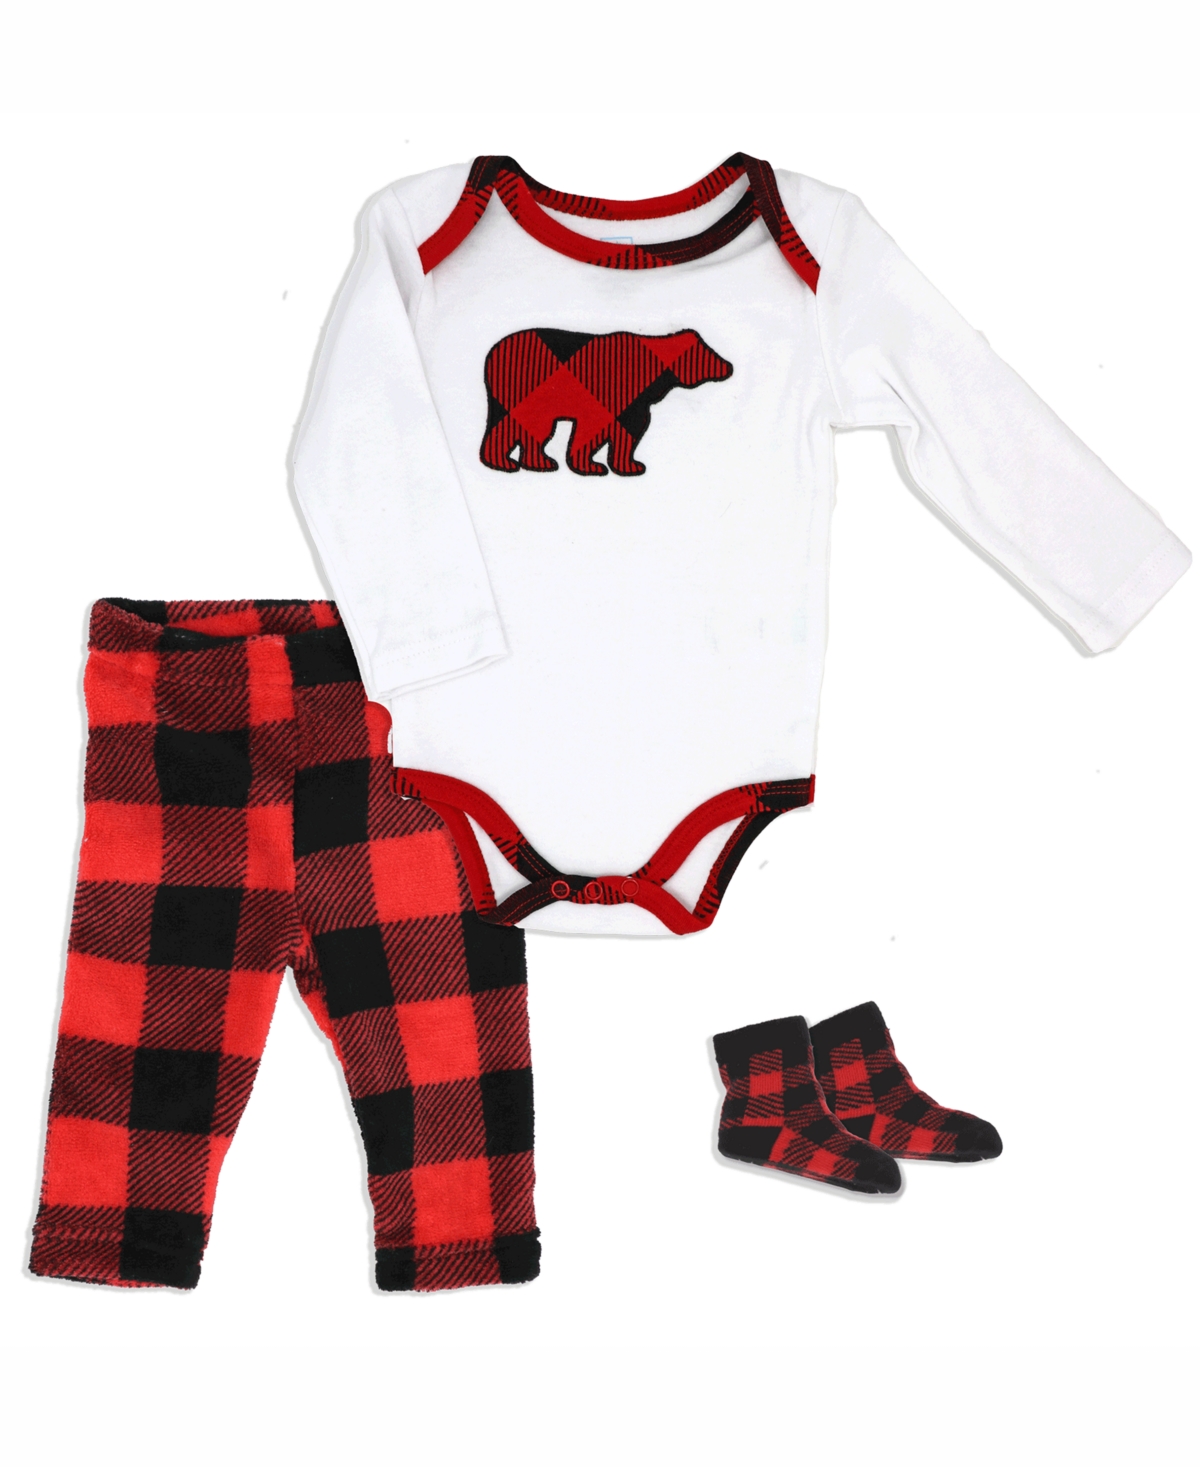 Baby Mode Baby Boys Or Baby Girls Buffalo Plaid Bodysuit, Pants And Socks, 3 Piece Set In Red And Black